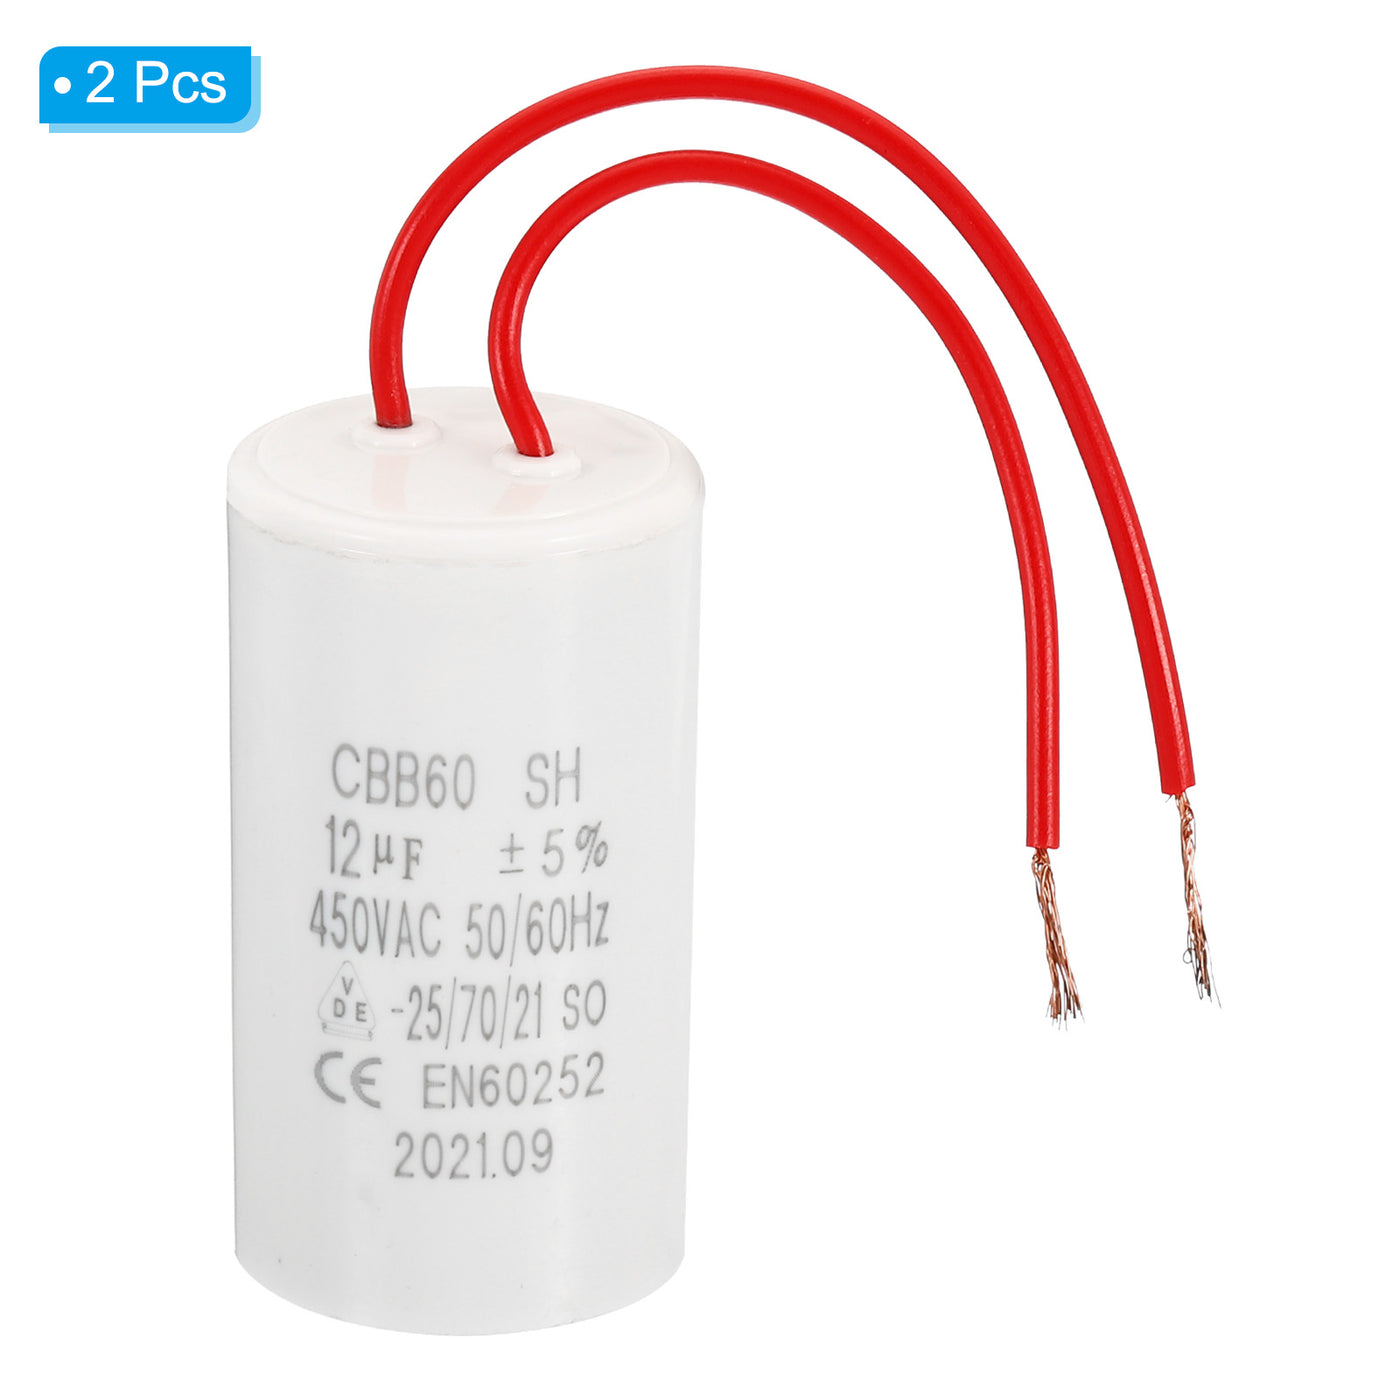 Harfington CBB60 12uF Run Capacitor,2Pcs AC450V 50/60Hz with 2 Wires 12cm for Water Pump